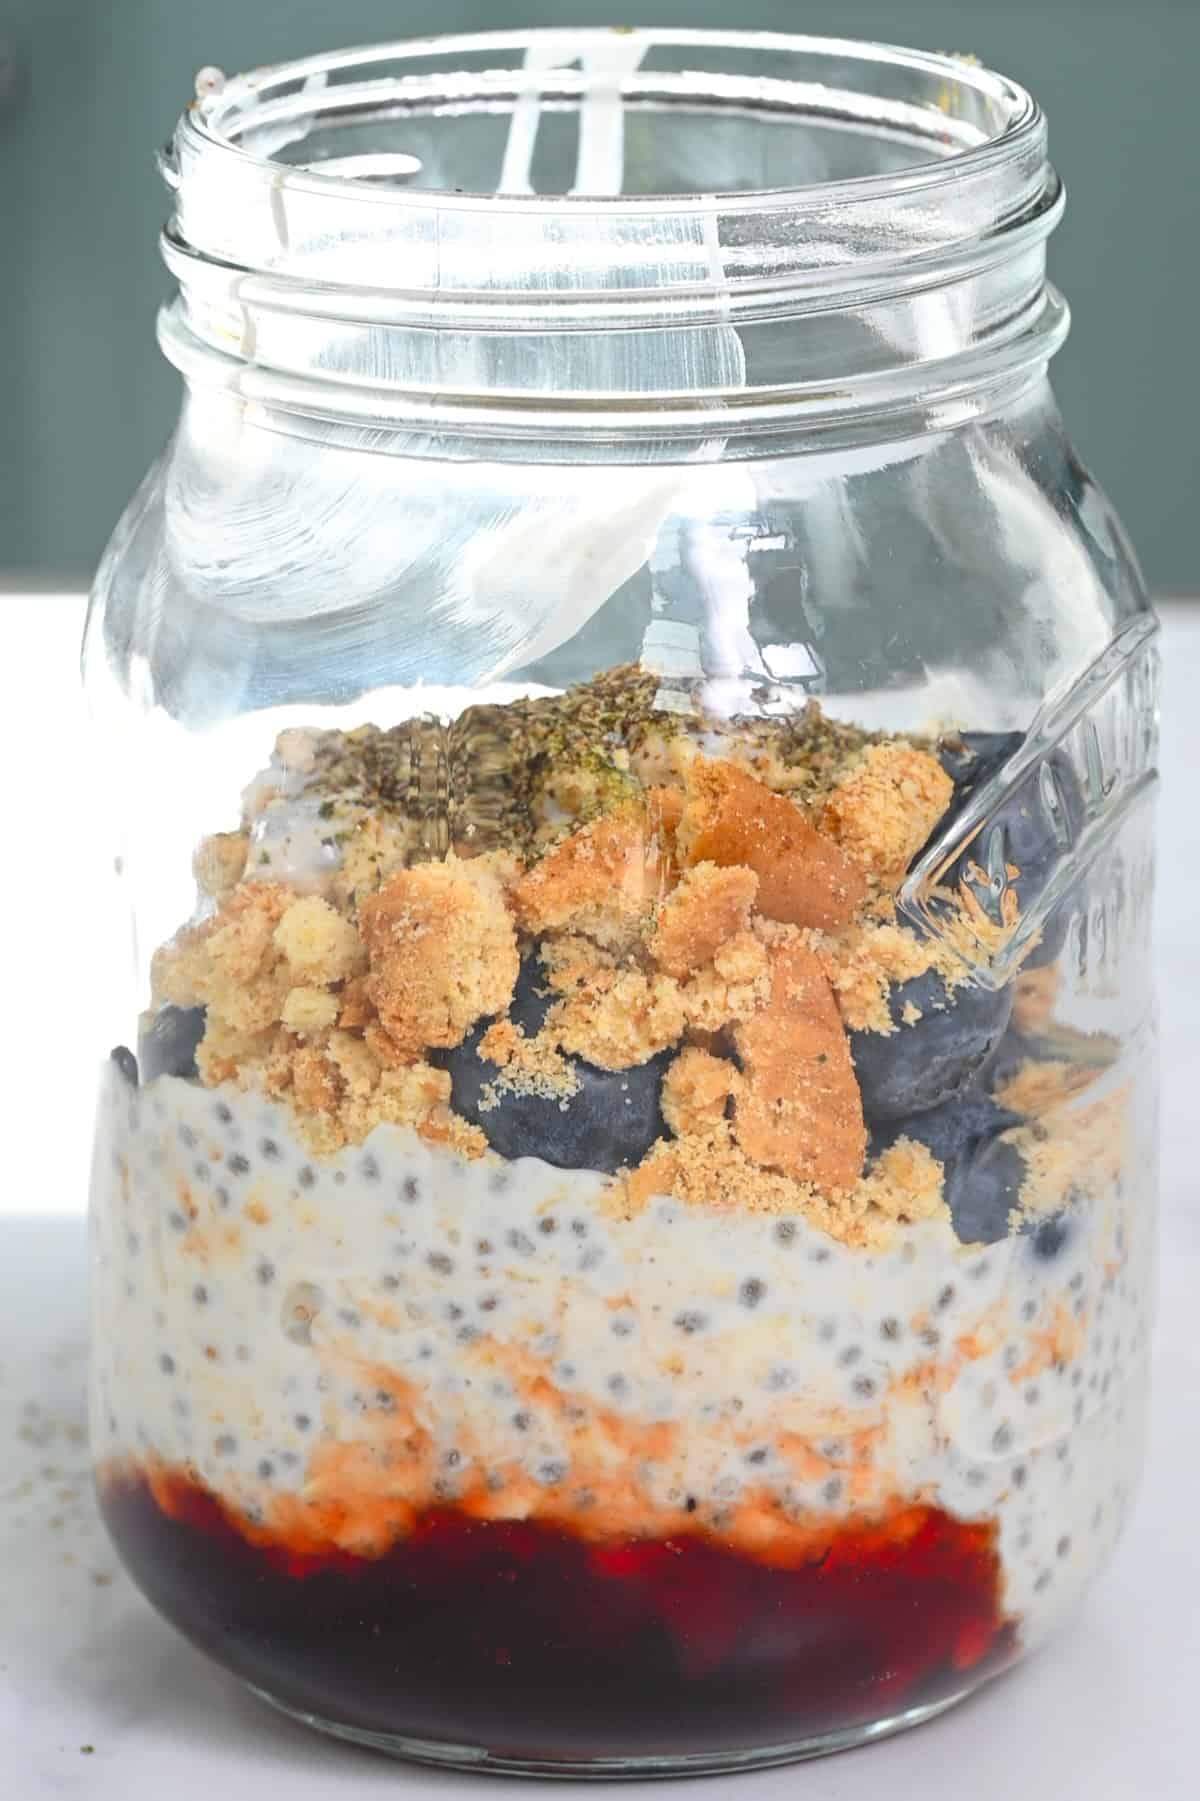 https://www.alphafoodie.com/wp-content/uploads/2022/06/How-to-Make-Overnight-Oats-Blueberry-pie-overnight-oats-in-a-jar.jpeg